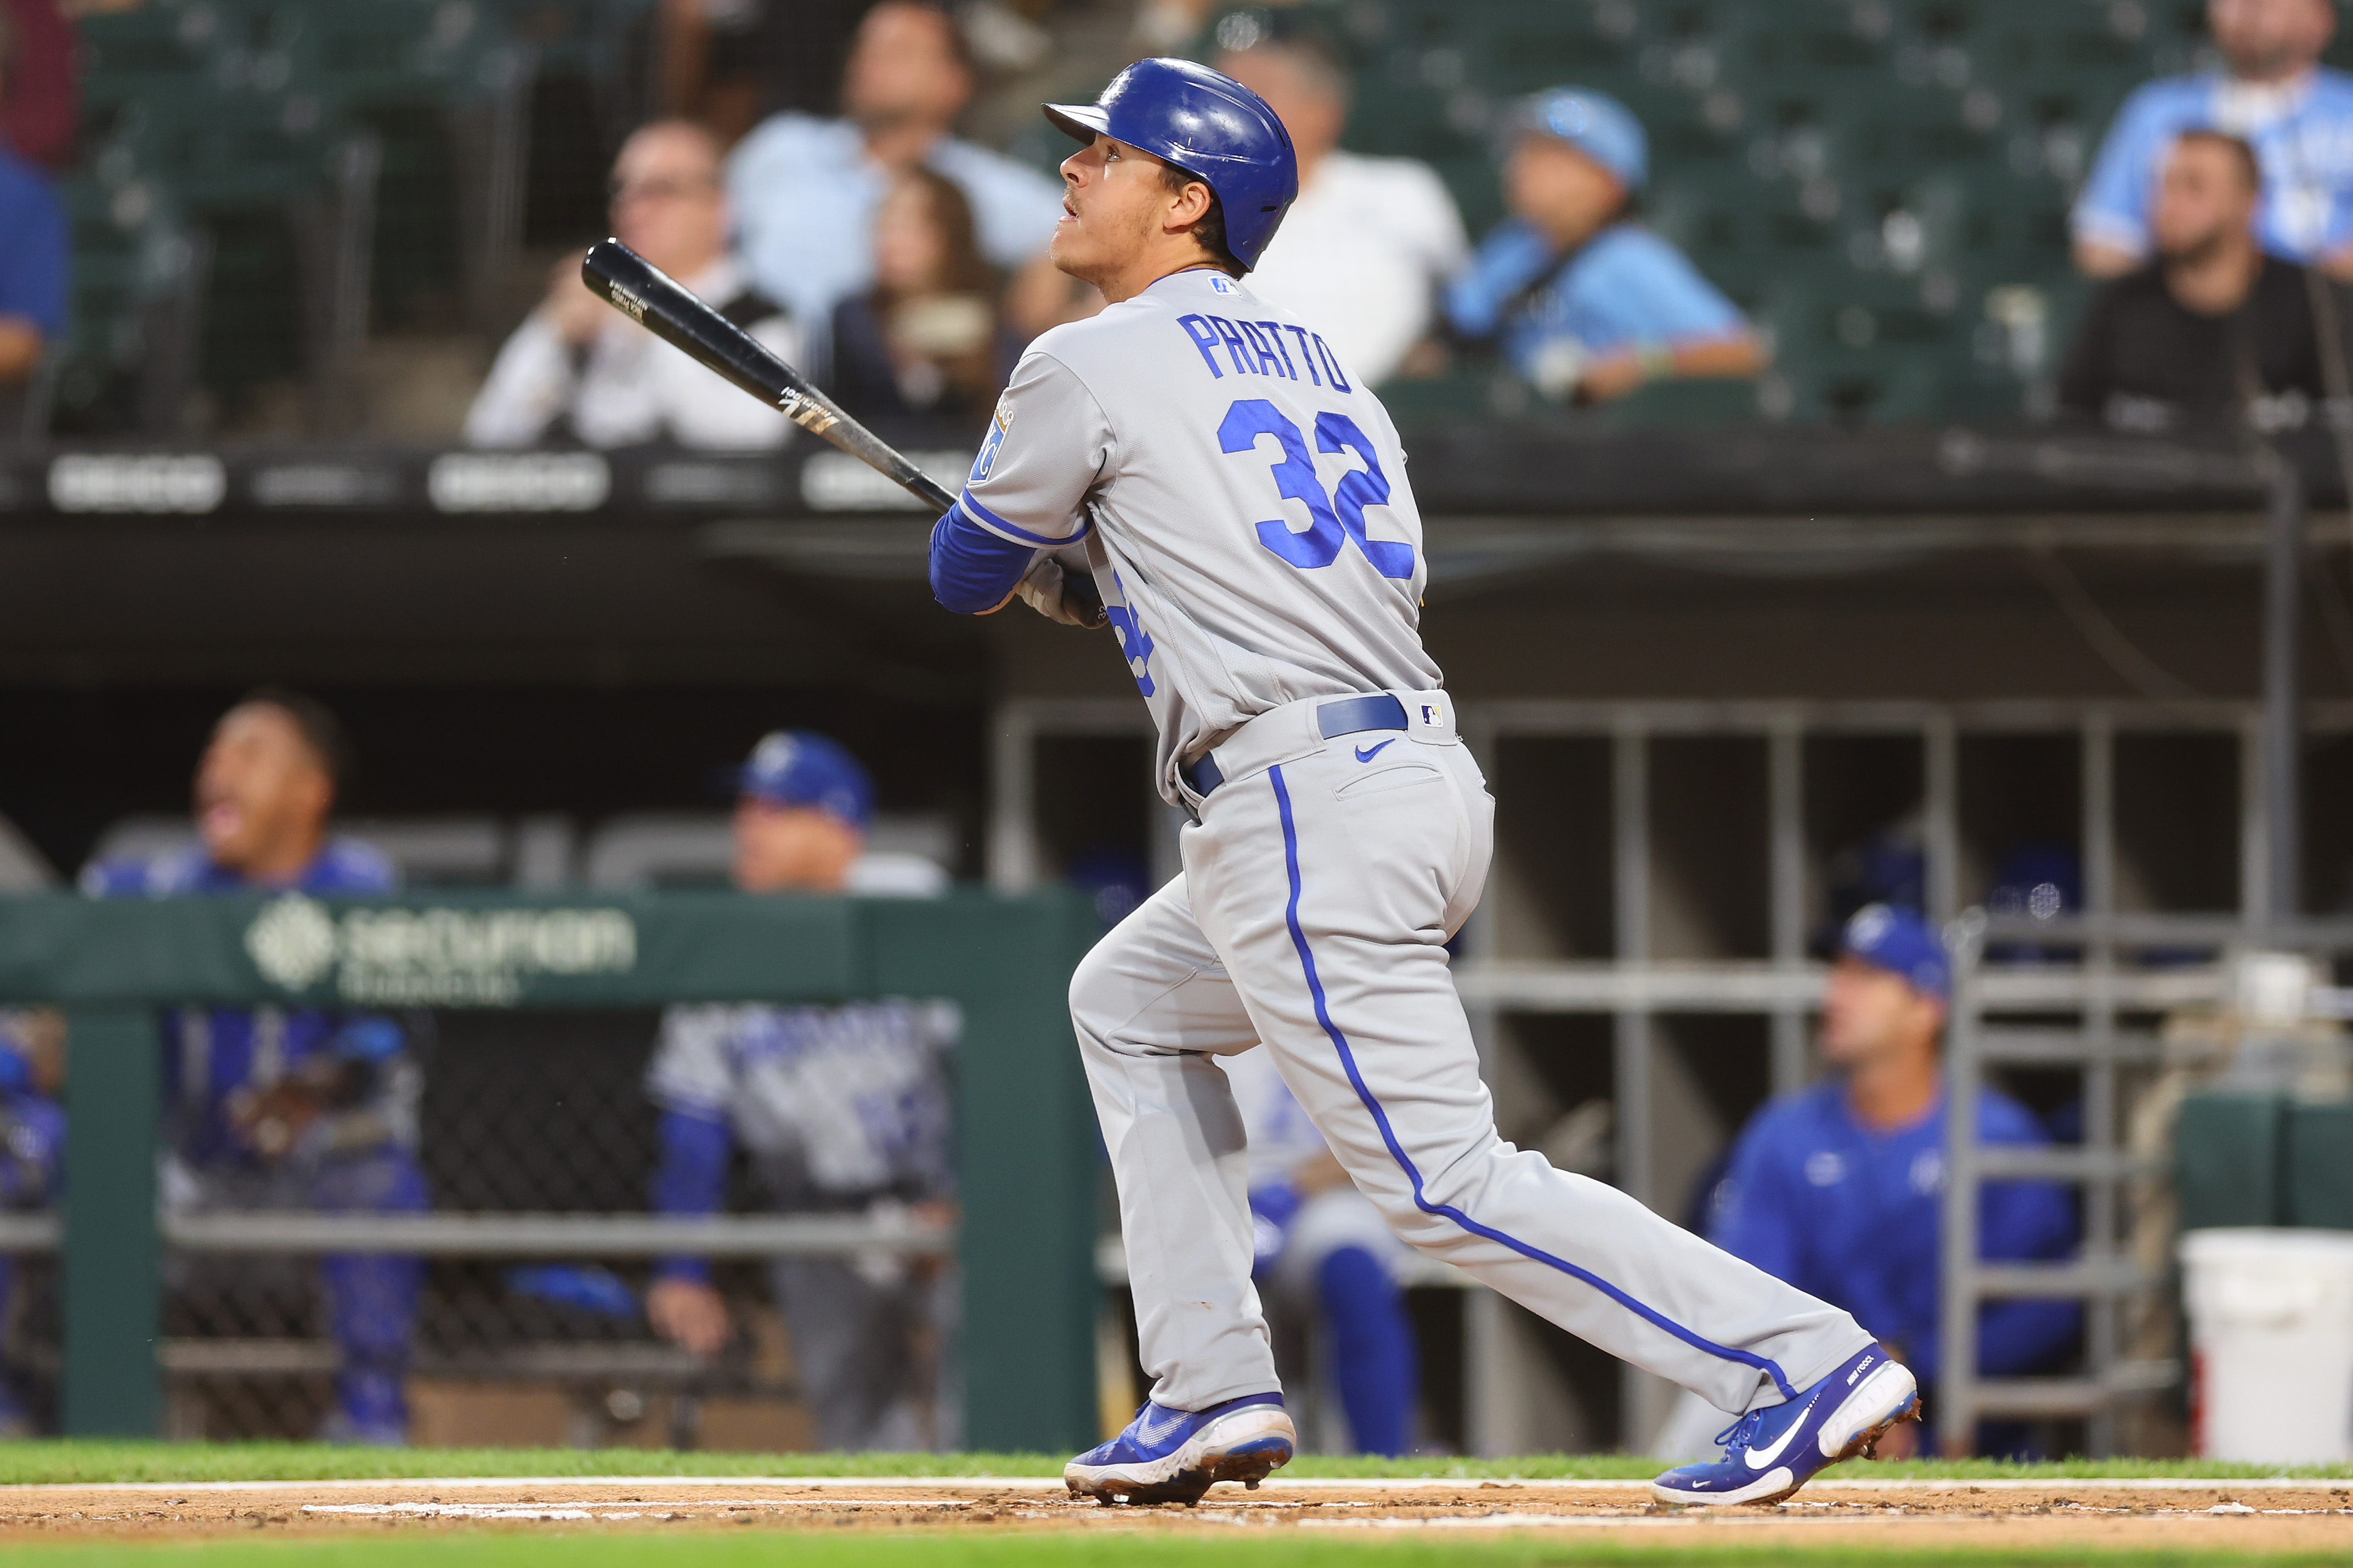 Nick Pratto #32 of the Kansas City Royals hits a solo home run during the second inning against the Chicago White Sox at Guaranteed Rate Field on August 30, 2022 in Chicago, Illinois.